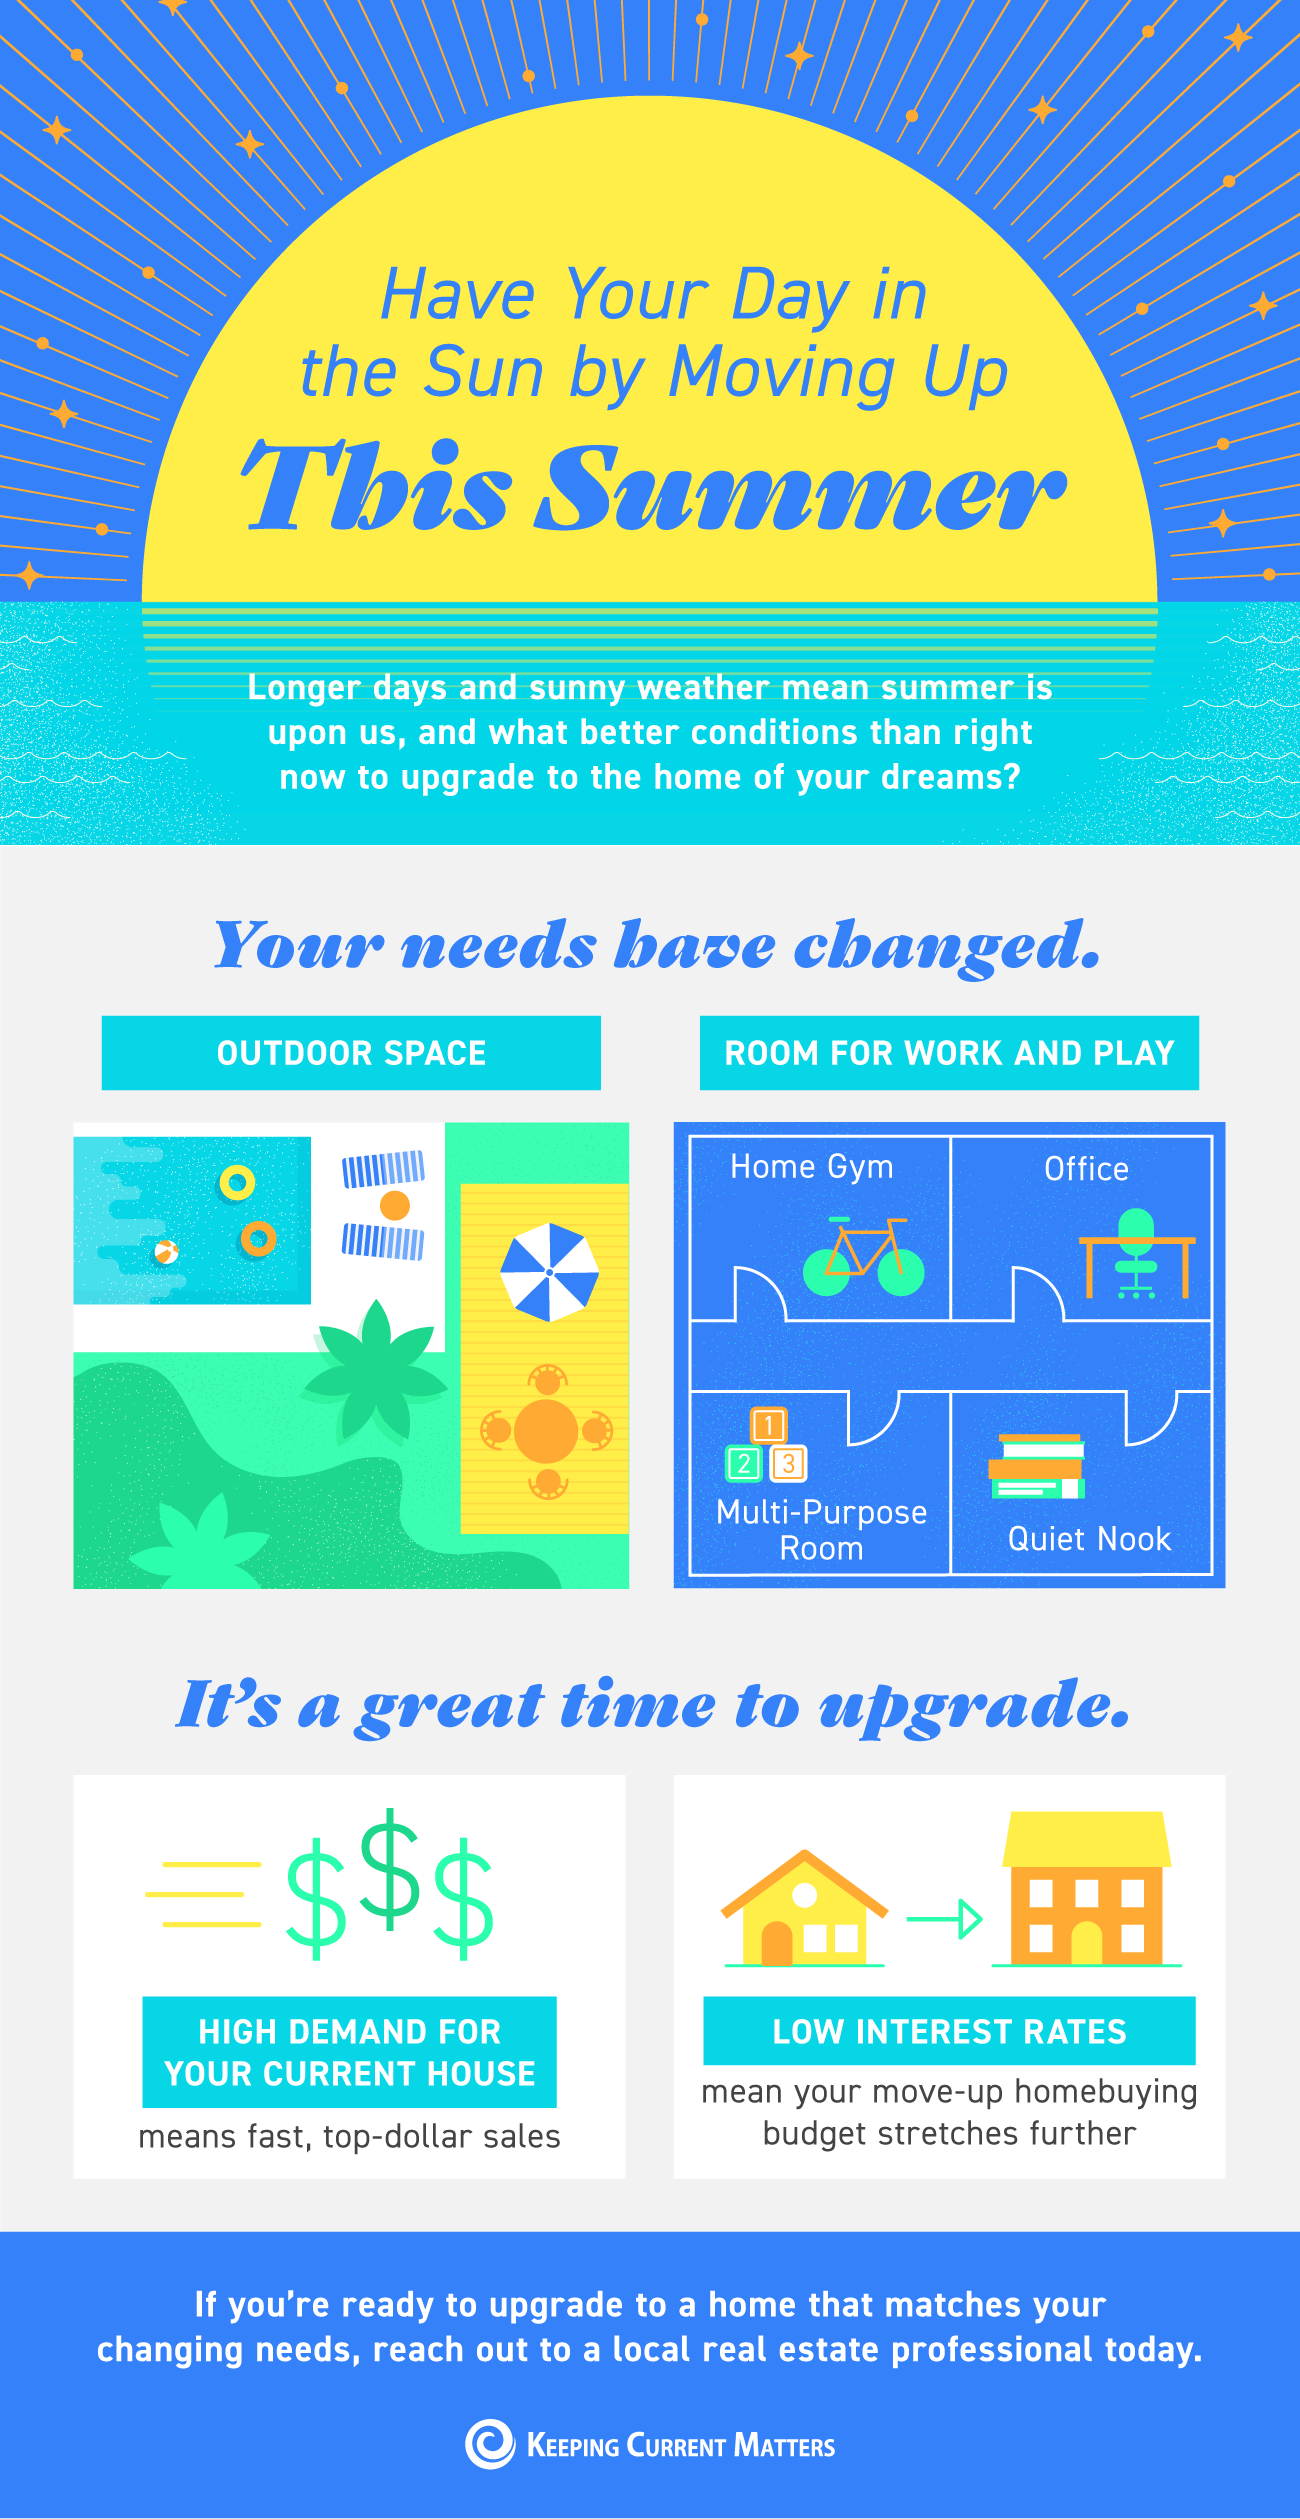 Have Your Day in the Sun by Moving Up This Summer [INFOGRAPHIC] | Keeping Current Matters